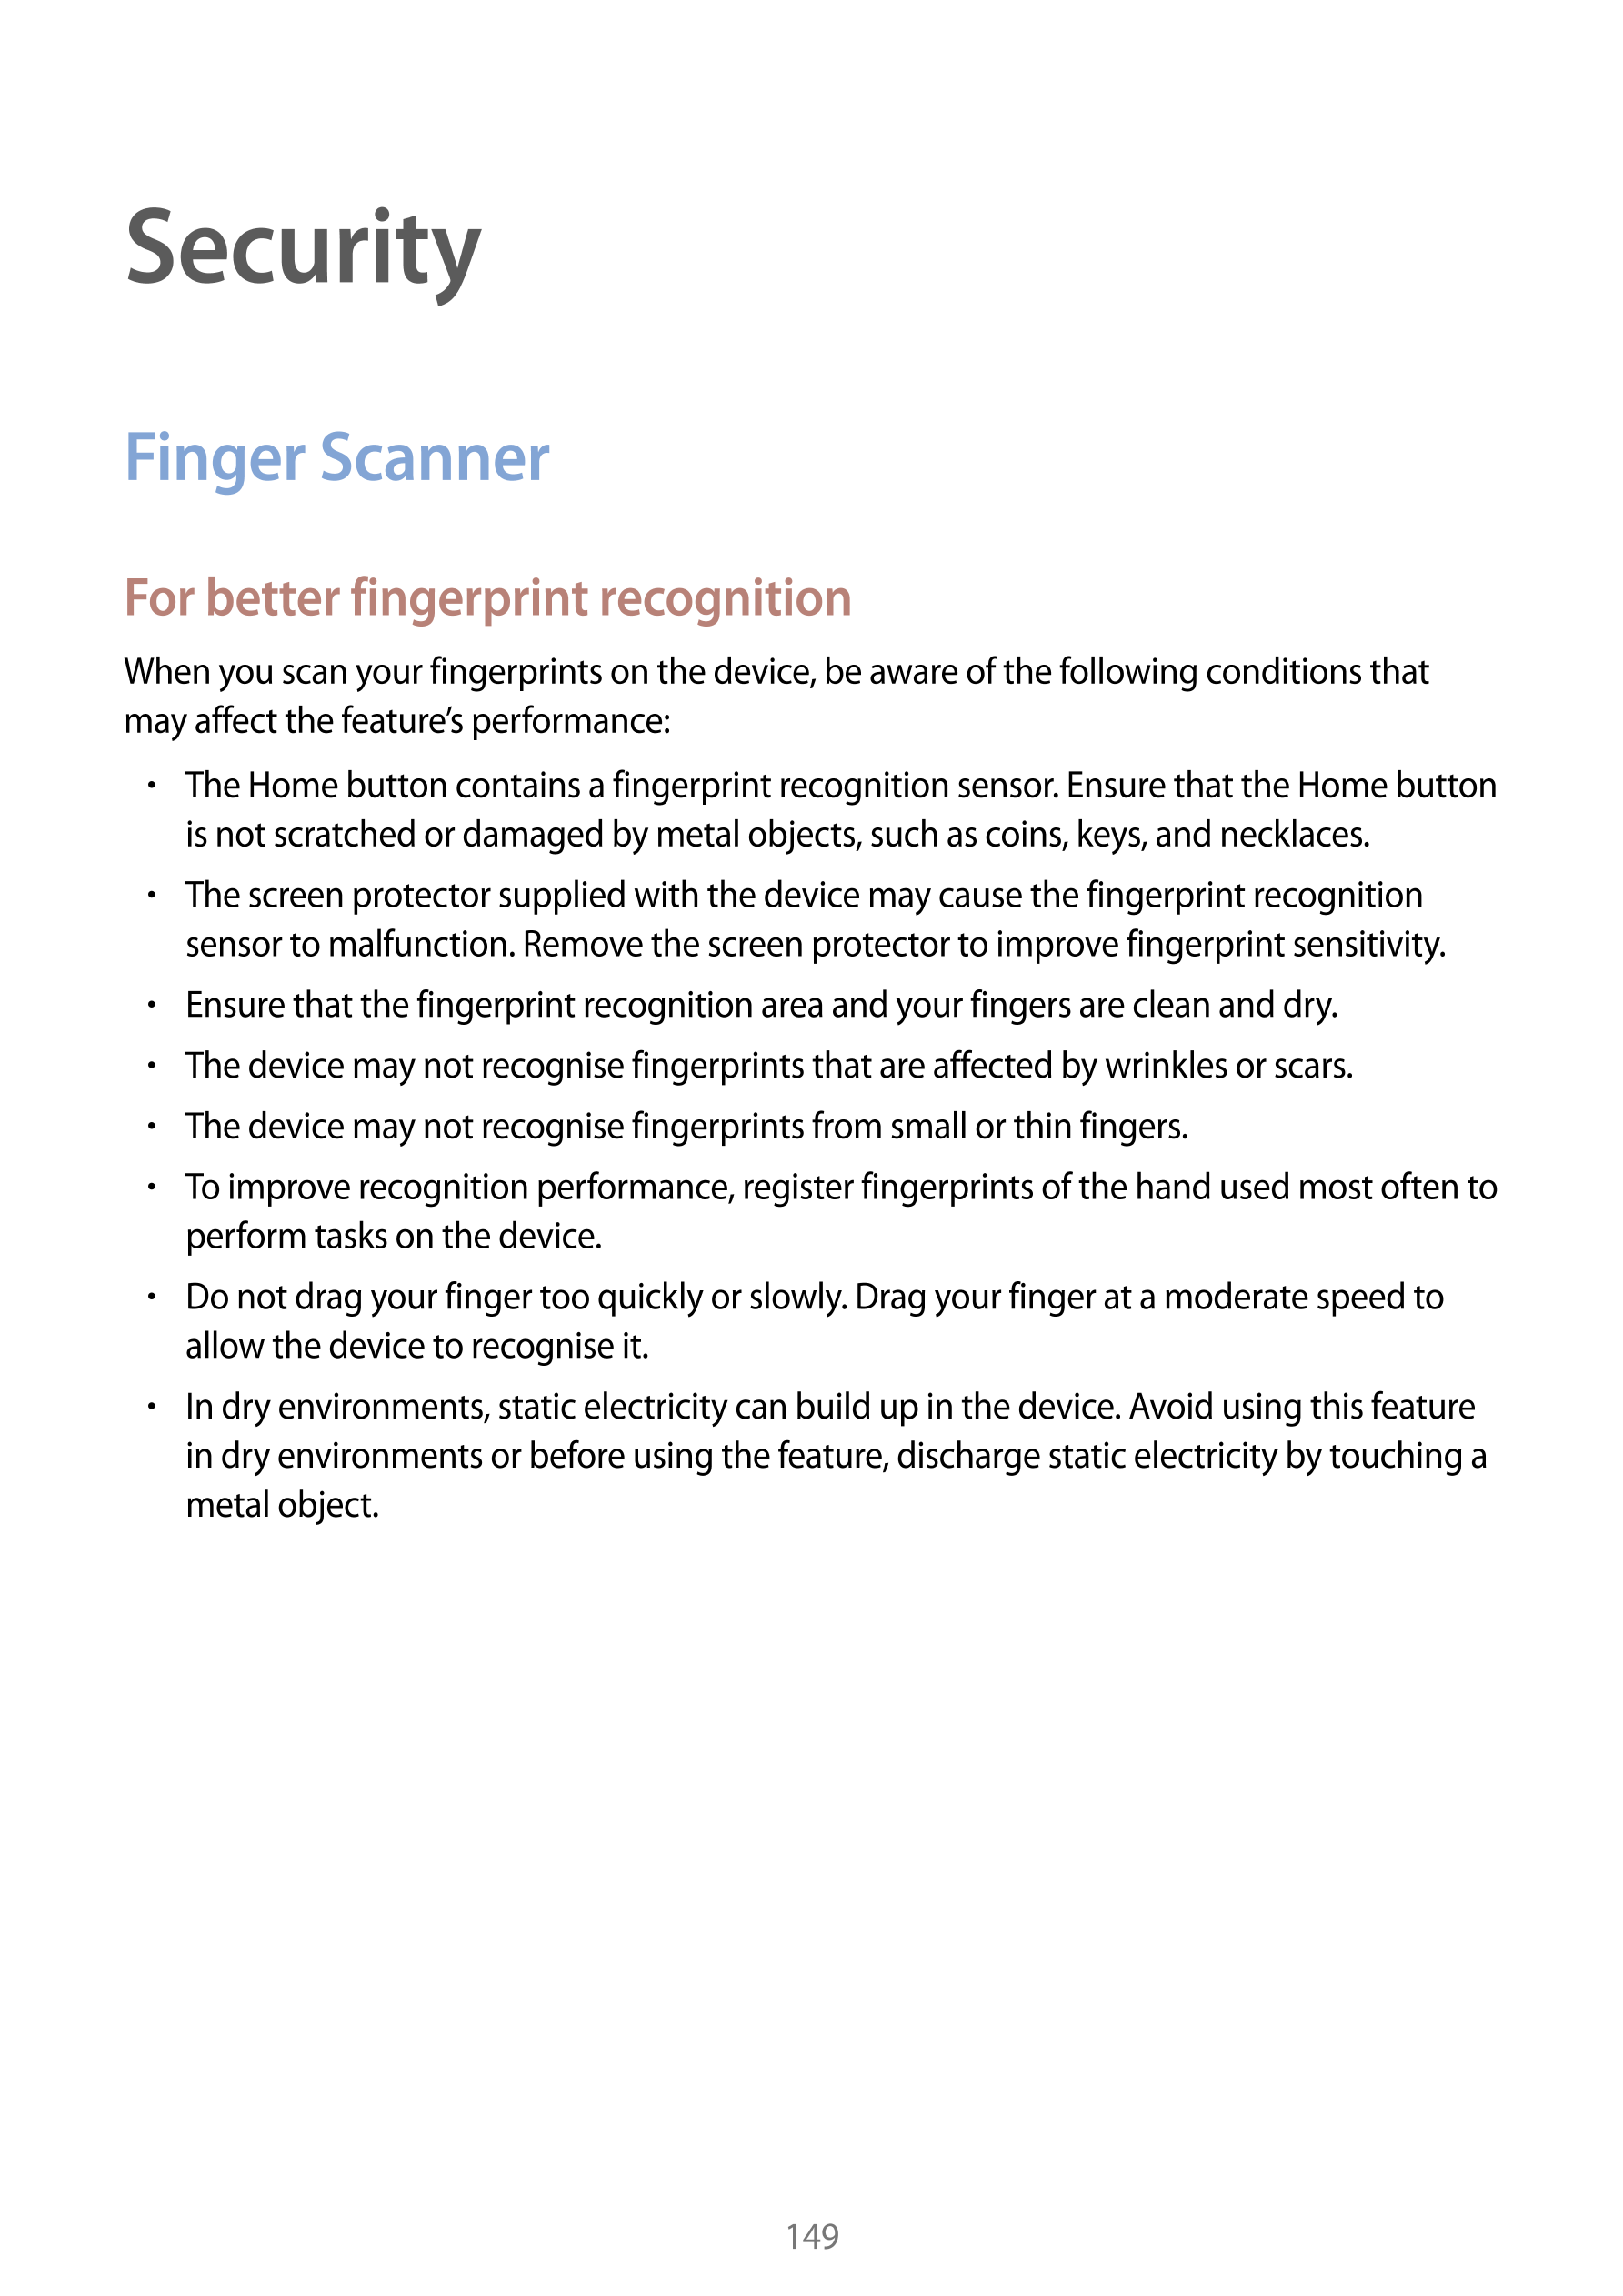 Security
Finger Scanner
For better fingerprint recognition
When you scan your fingerprints on the device, be aware of the follow